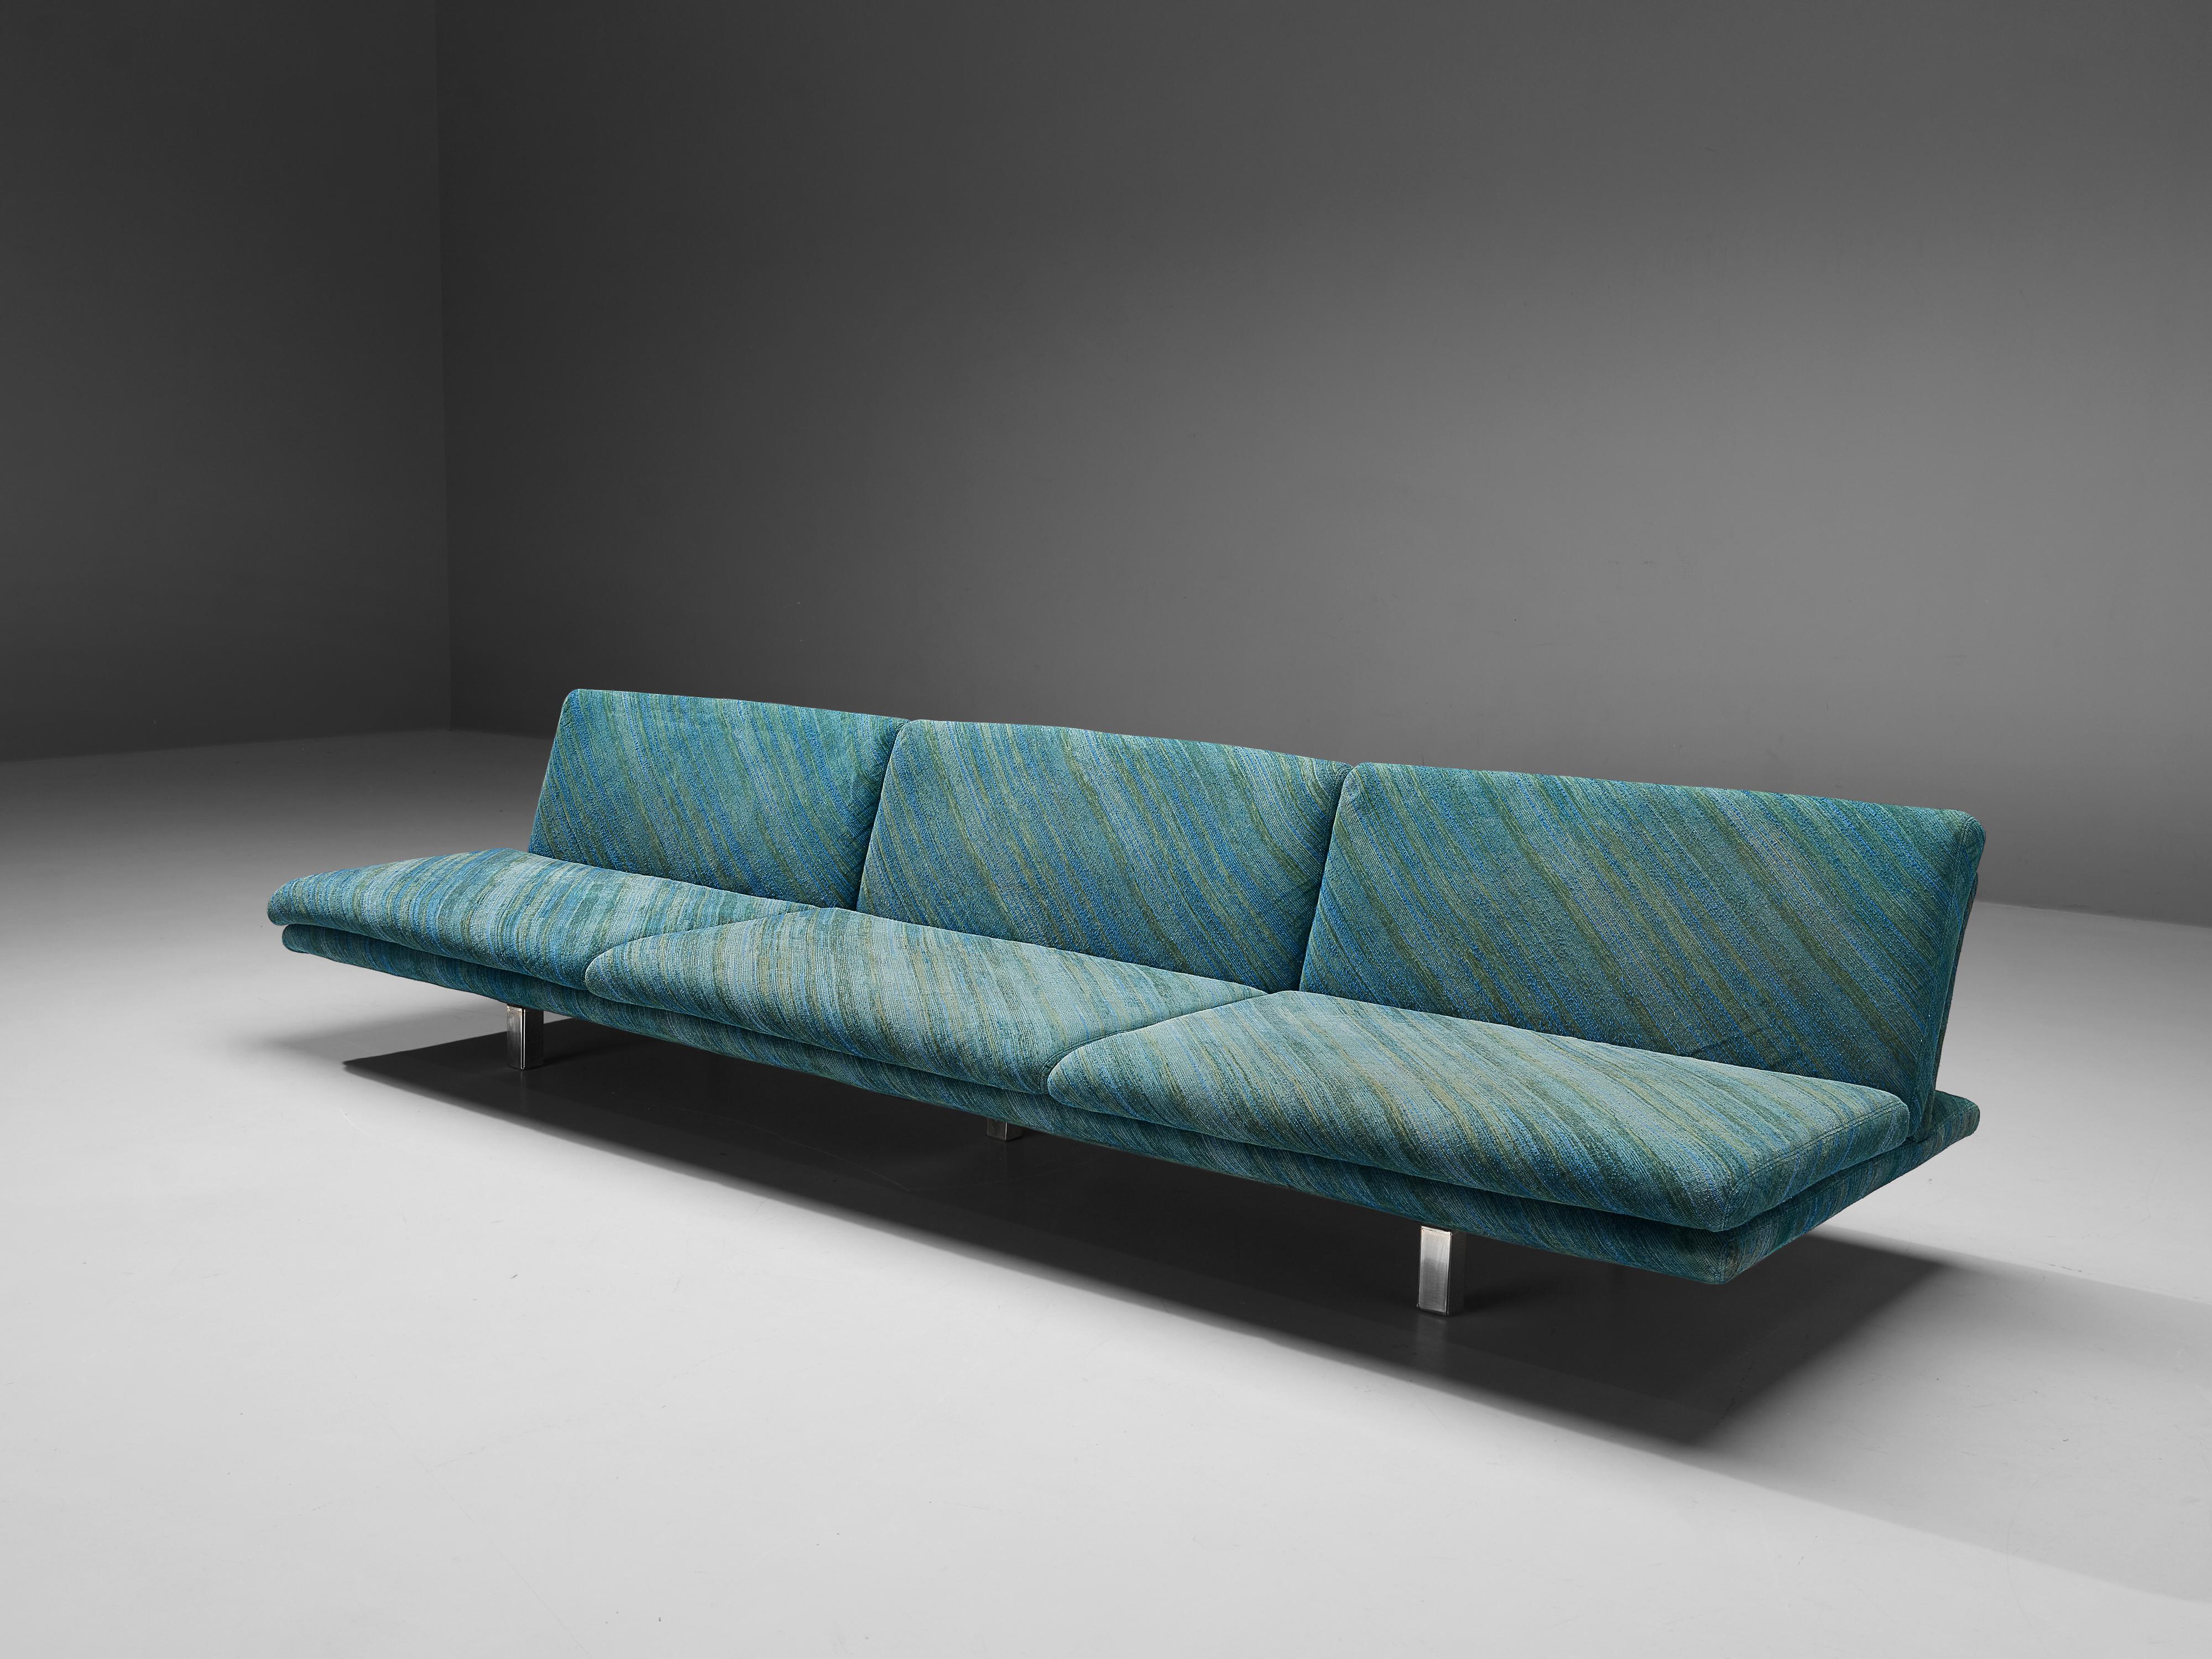 Saporiti, sofa, upholstered in green-blue textured fabric, metal legs, Italy, 1960s

Large sofa manufactured by Saporiti. This sofa is designed to be sleek, elegant and an eye-catcher. It has three seats without any armrests, emphasizing the